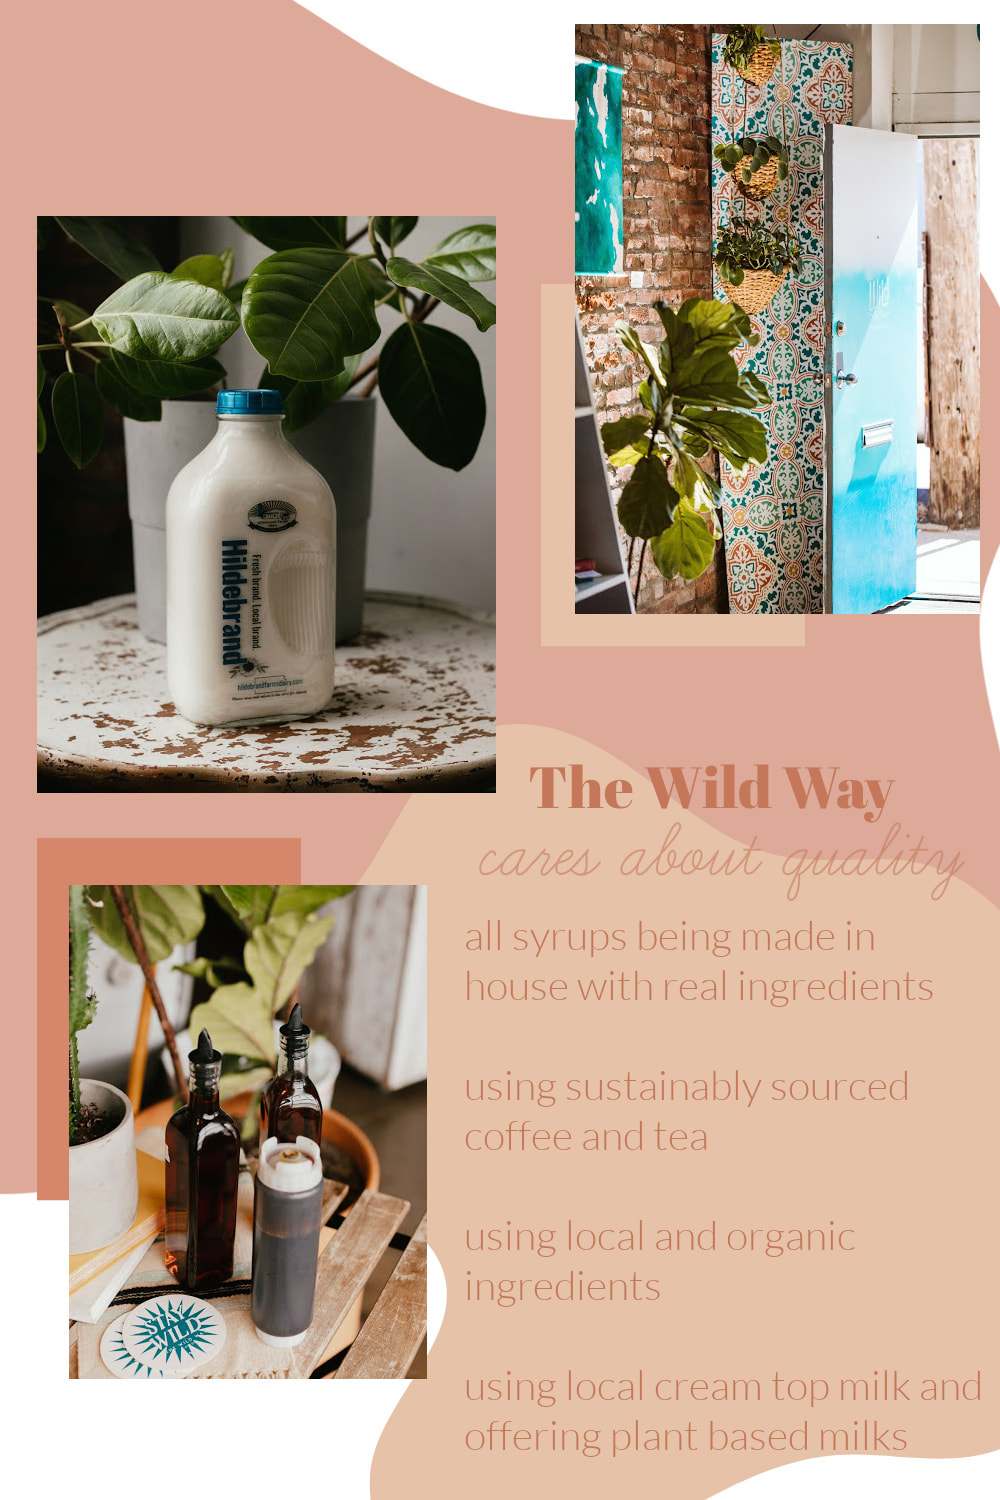 The Wild Way cares about quality of coffee and ingredients 